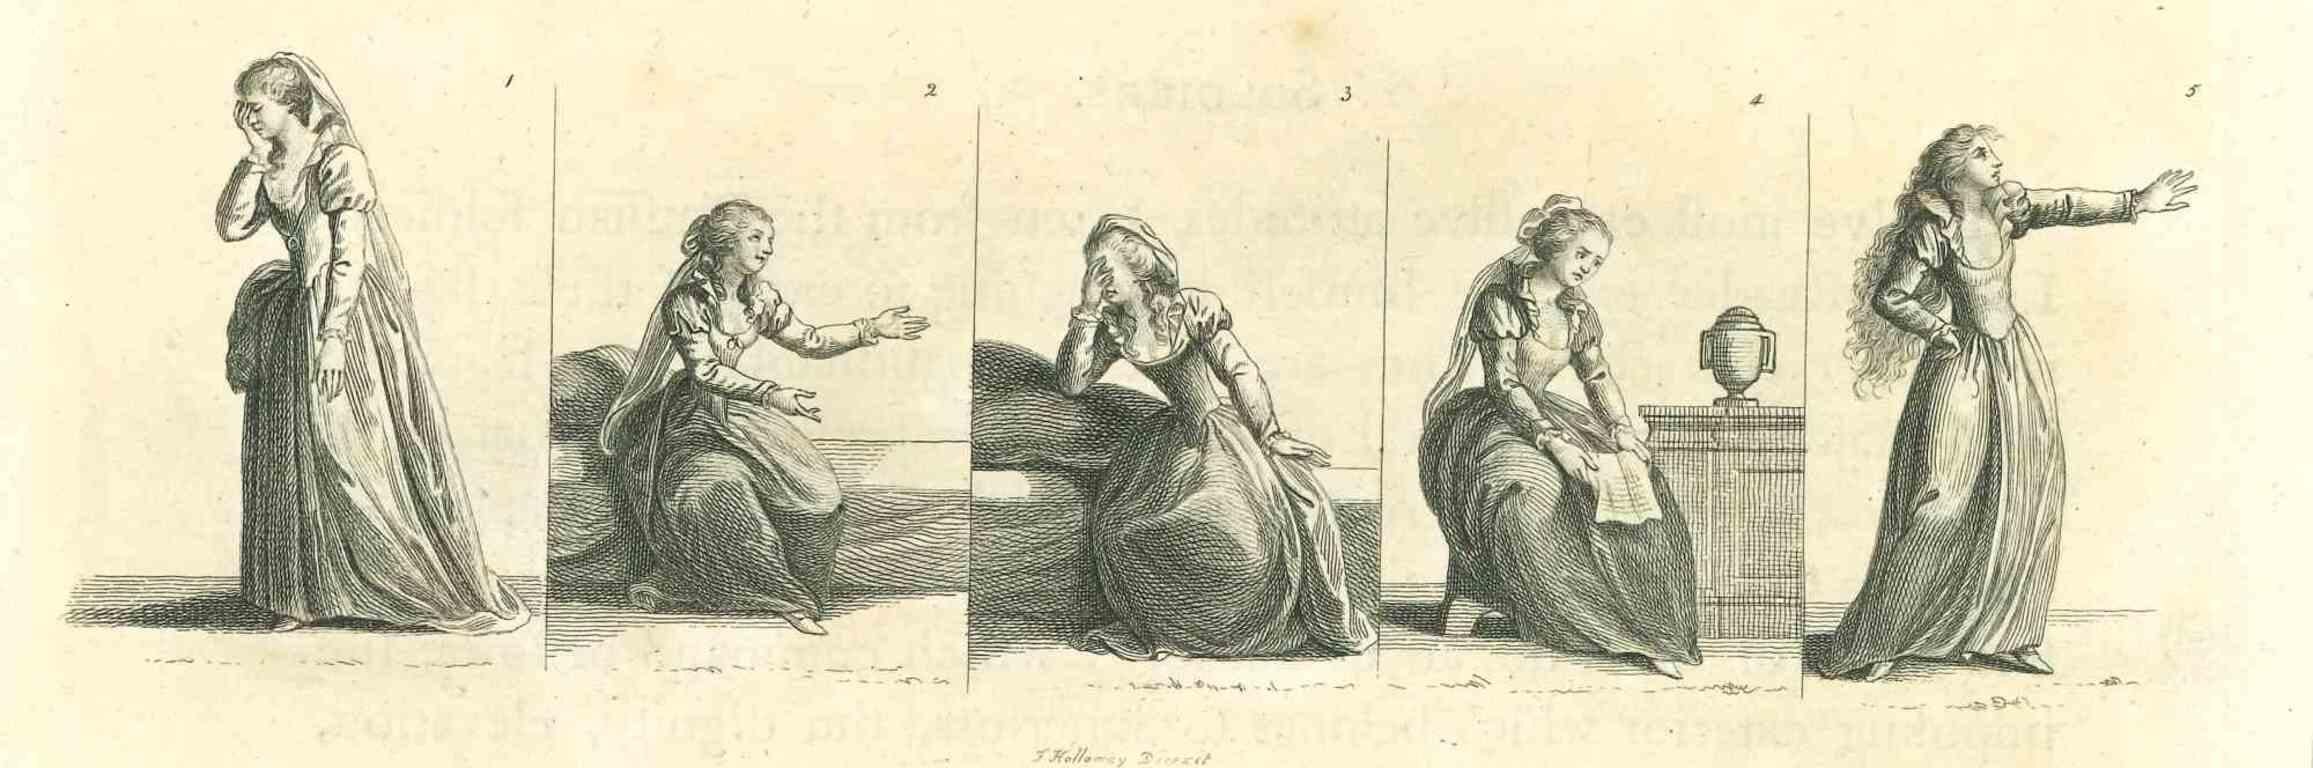 Desperation is an original artwork realized for Johann Caspar Lavater's "Essays on Physiognomy, Designed to promote the Knowledge and the Love of Mankind", London, Bensley, 1810. 

This artwork portrays a historical woman during different positions.